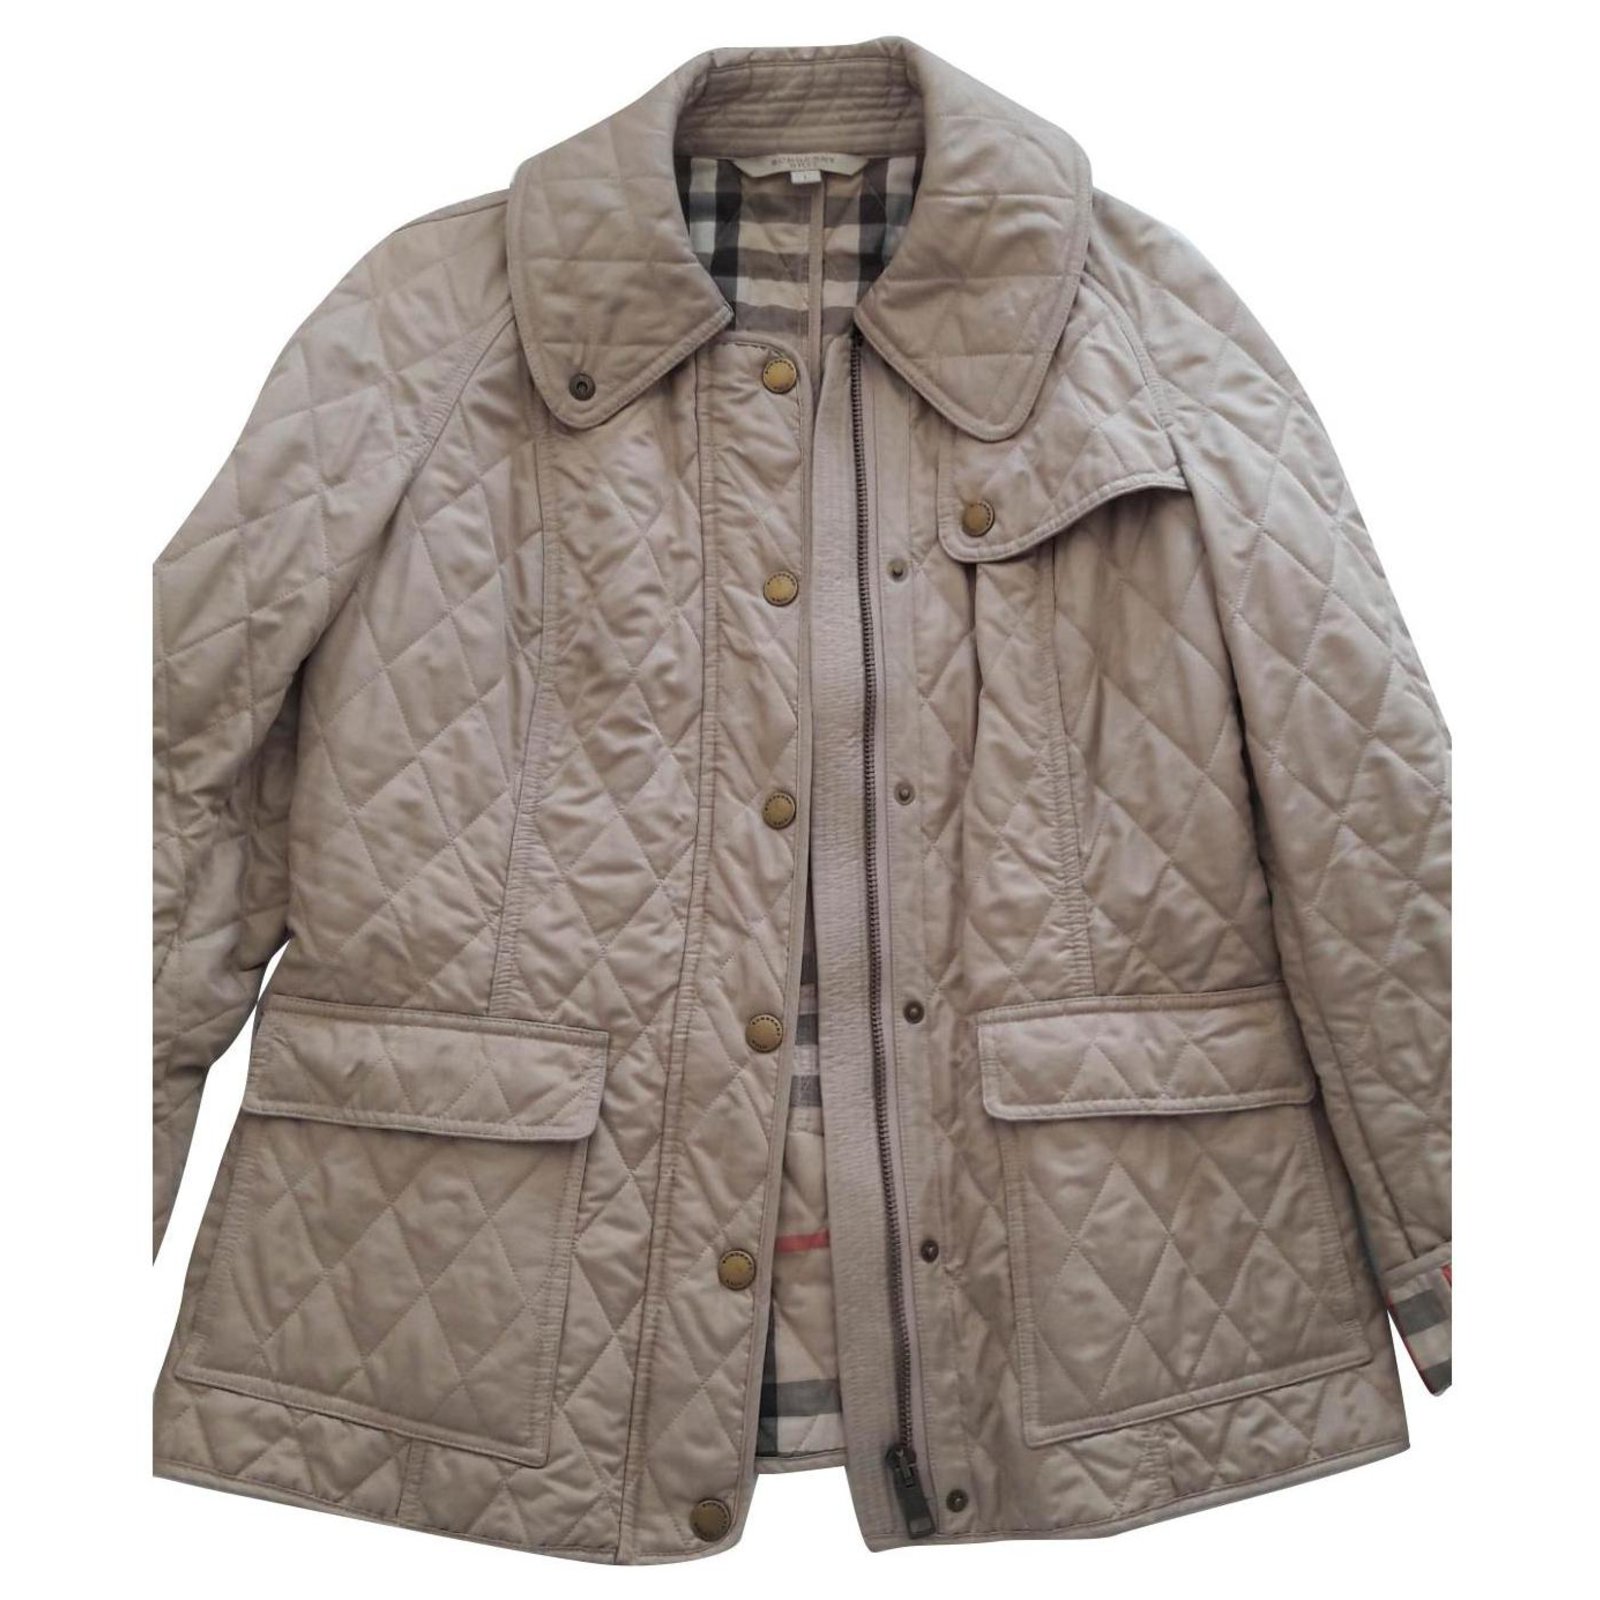 burberry quilted jacket sizing